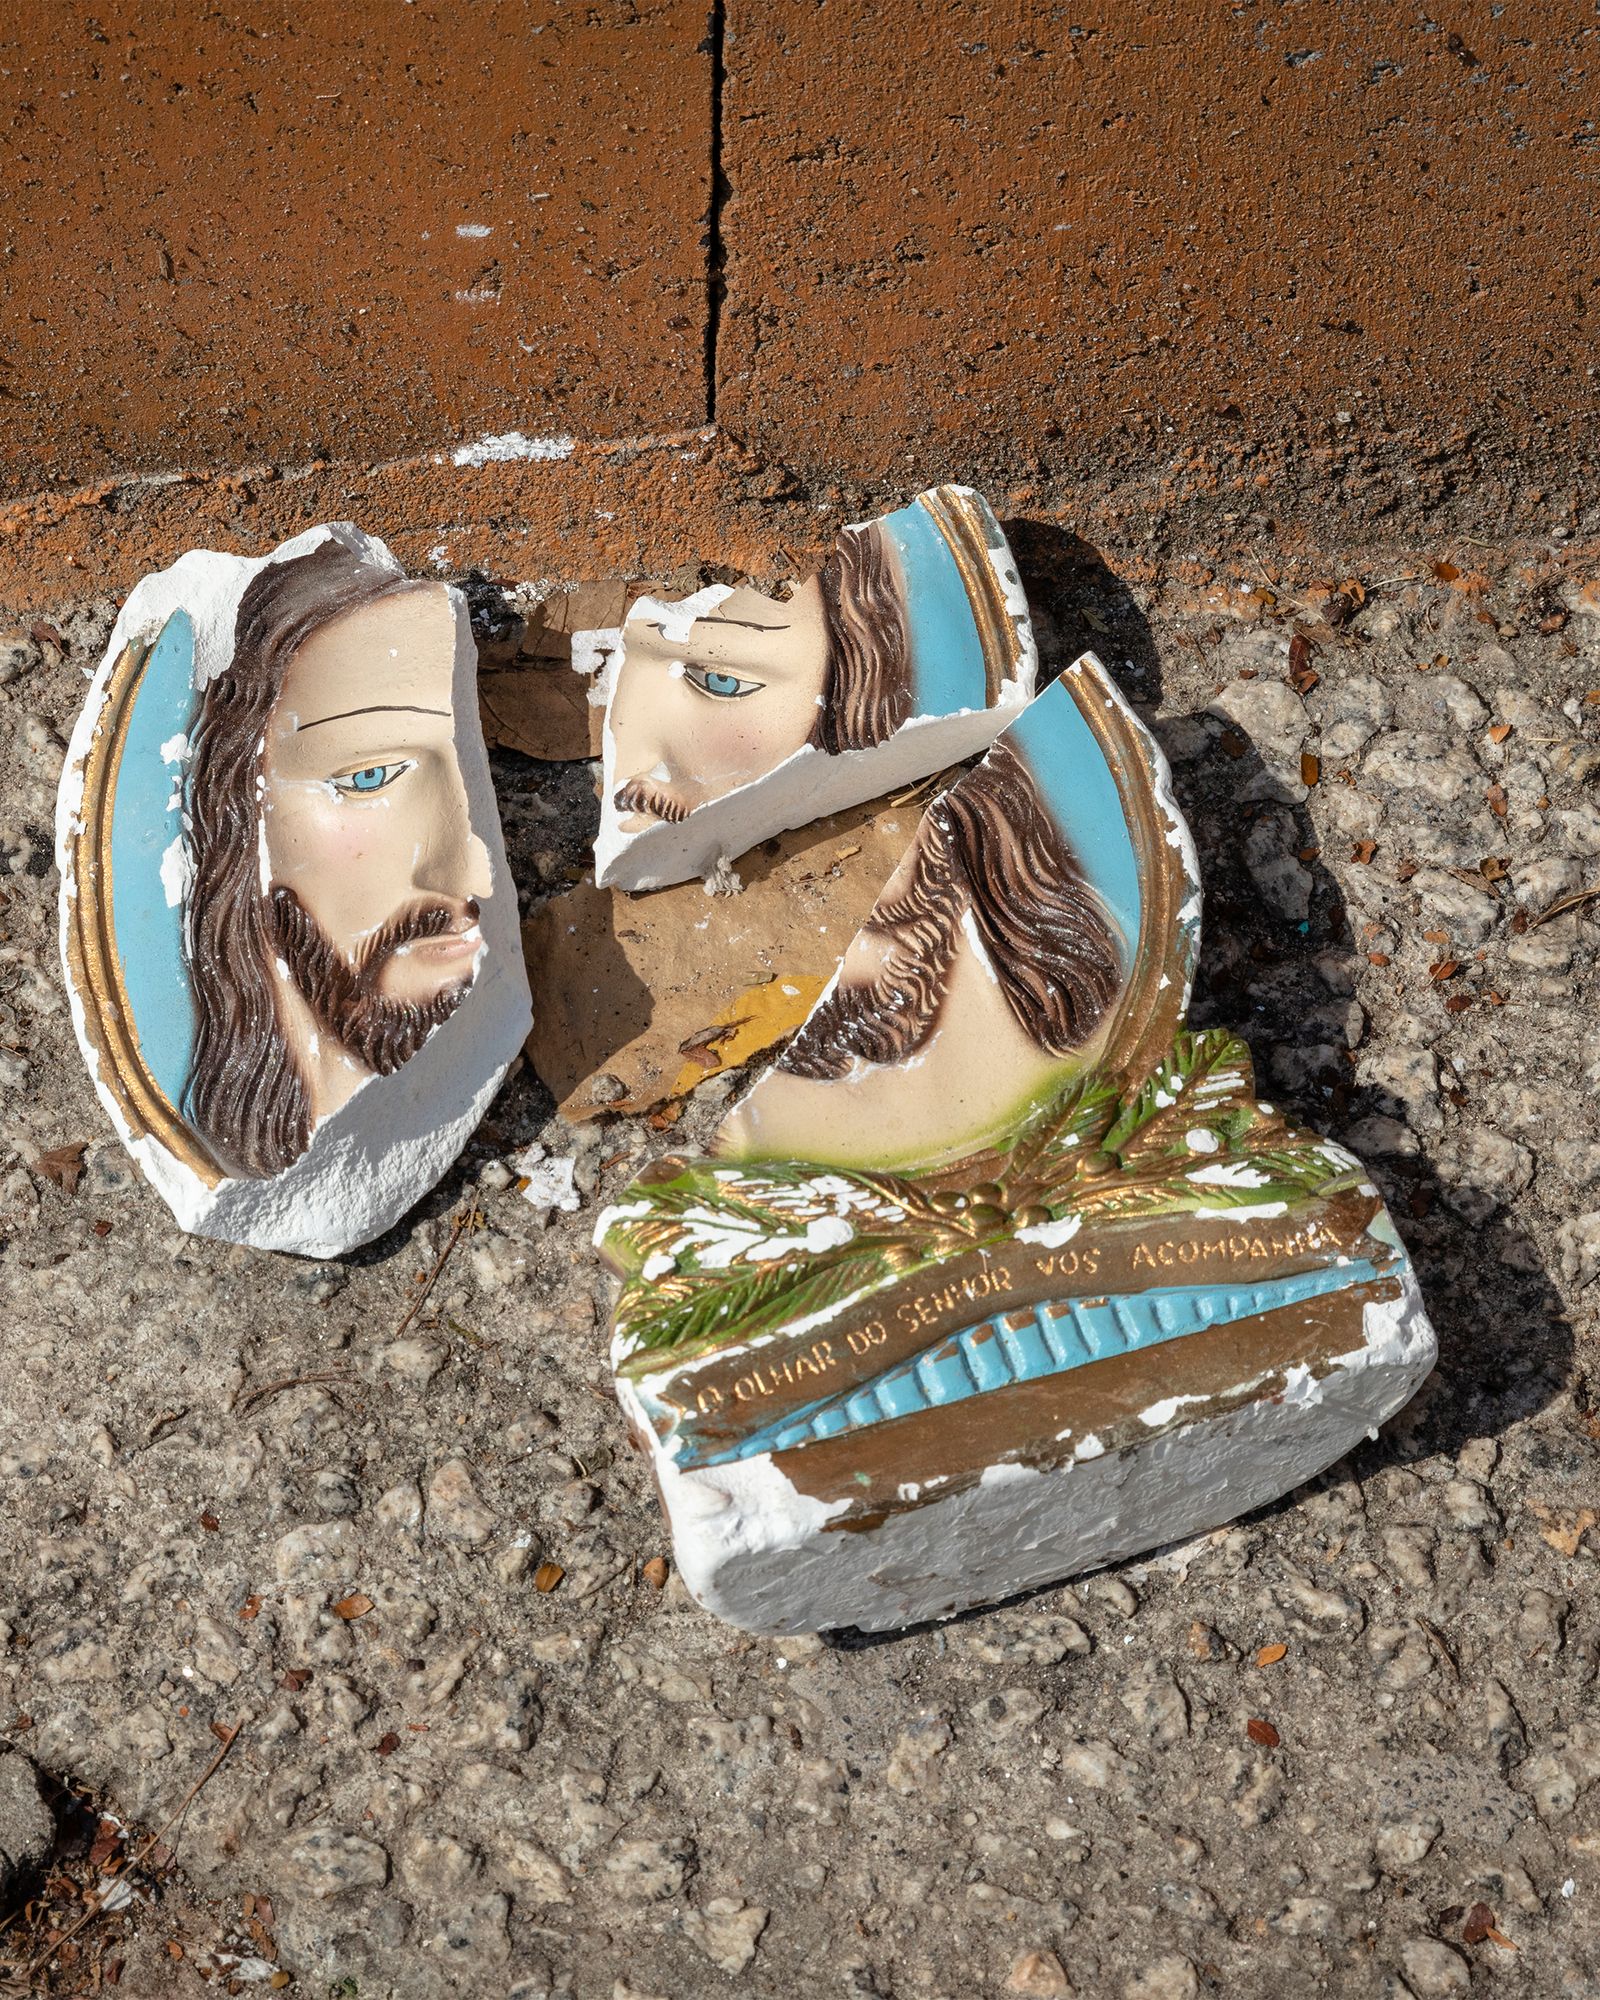 © Gui Christ - A broken Jesus image with the inscription "may the Lords' eye follows you"